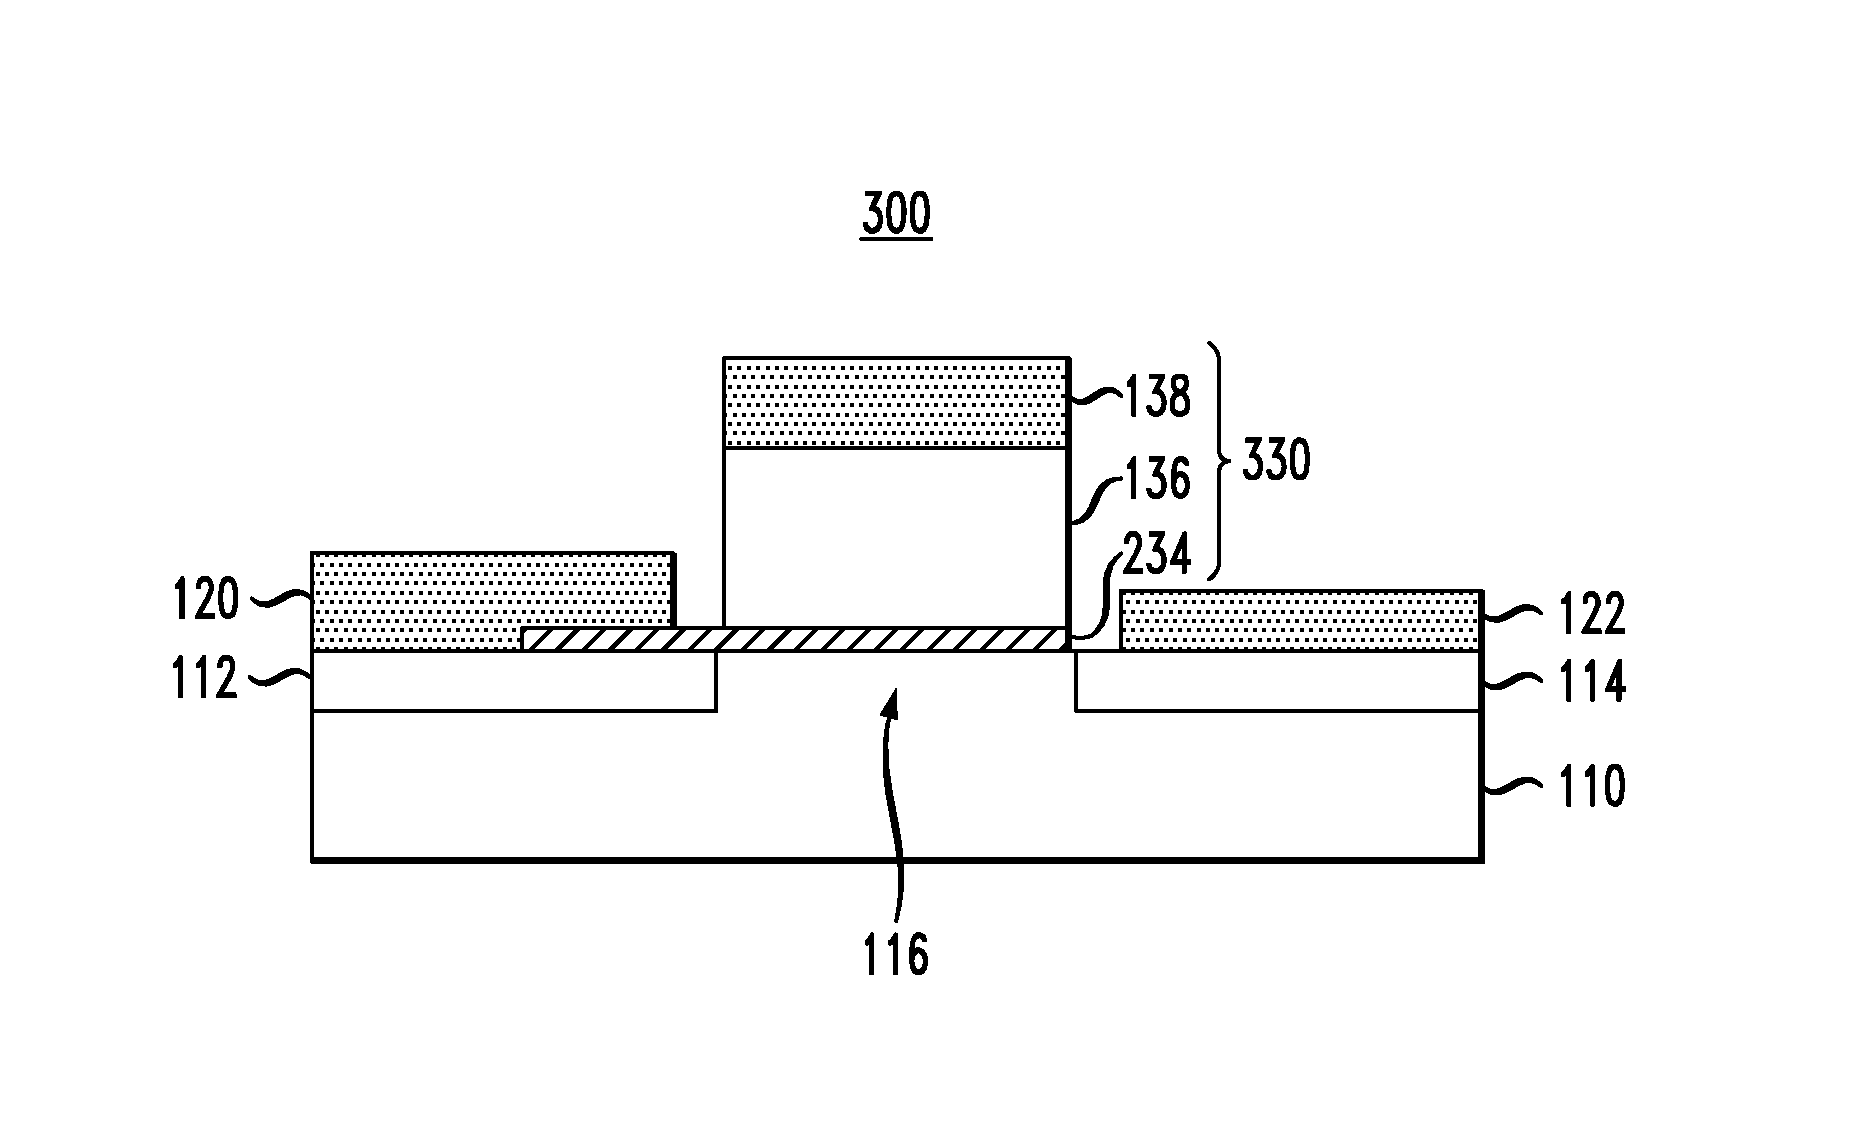 Ferroelectric semiconductor transistor devices having gate modulated conductive layer